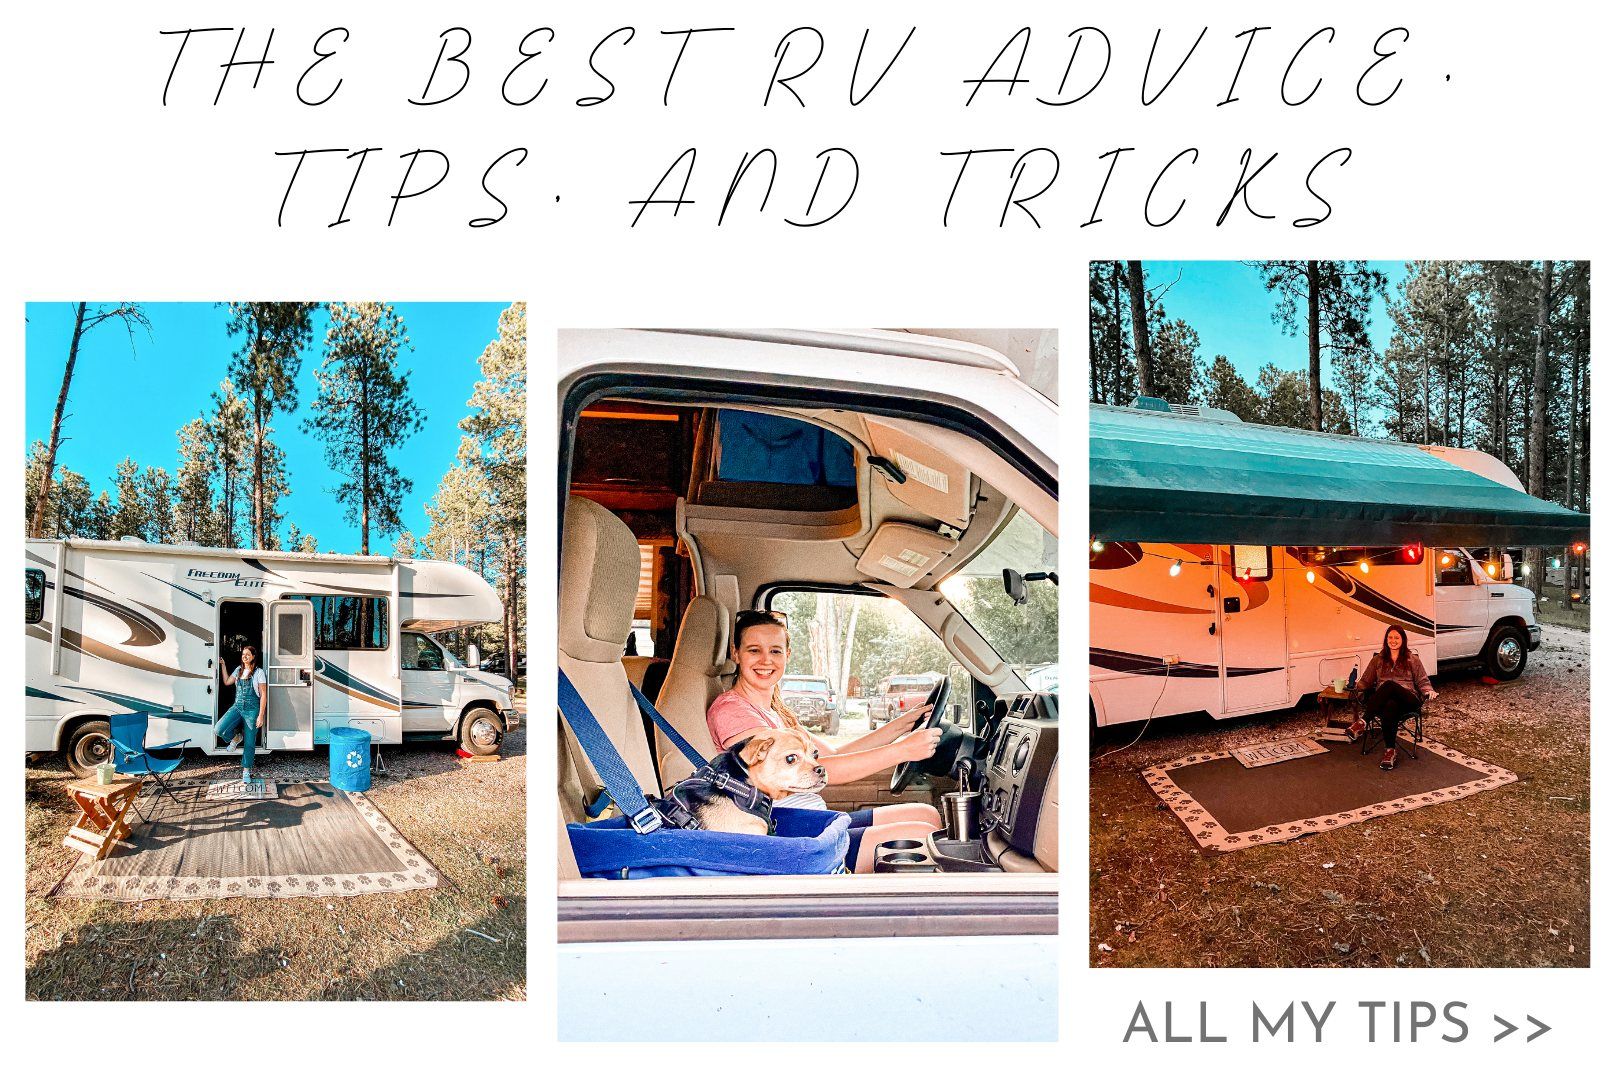 The Best RV Advice, Tips, and Tricks